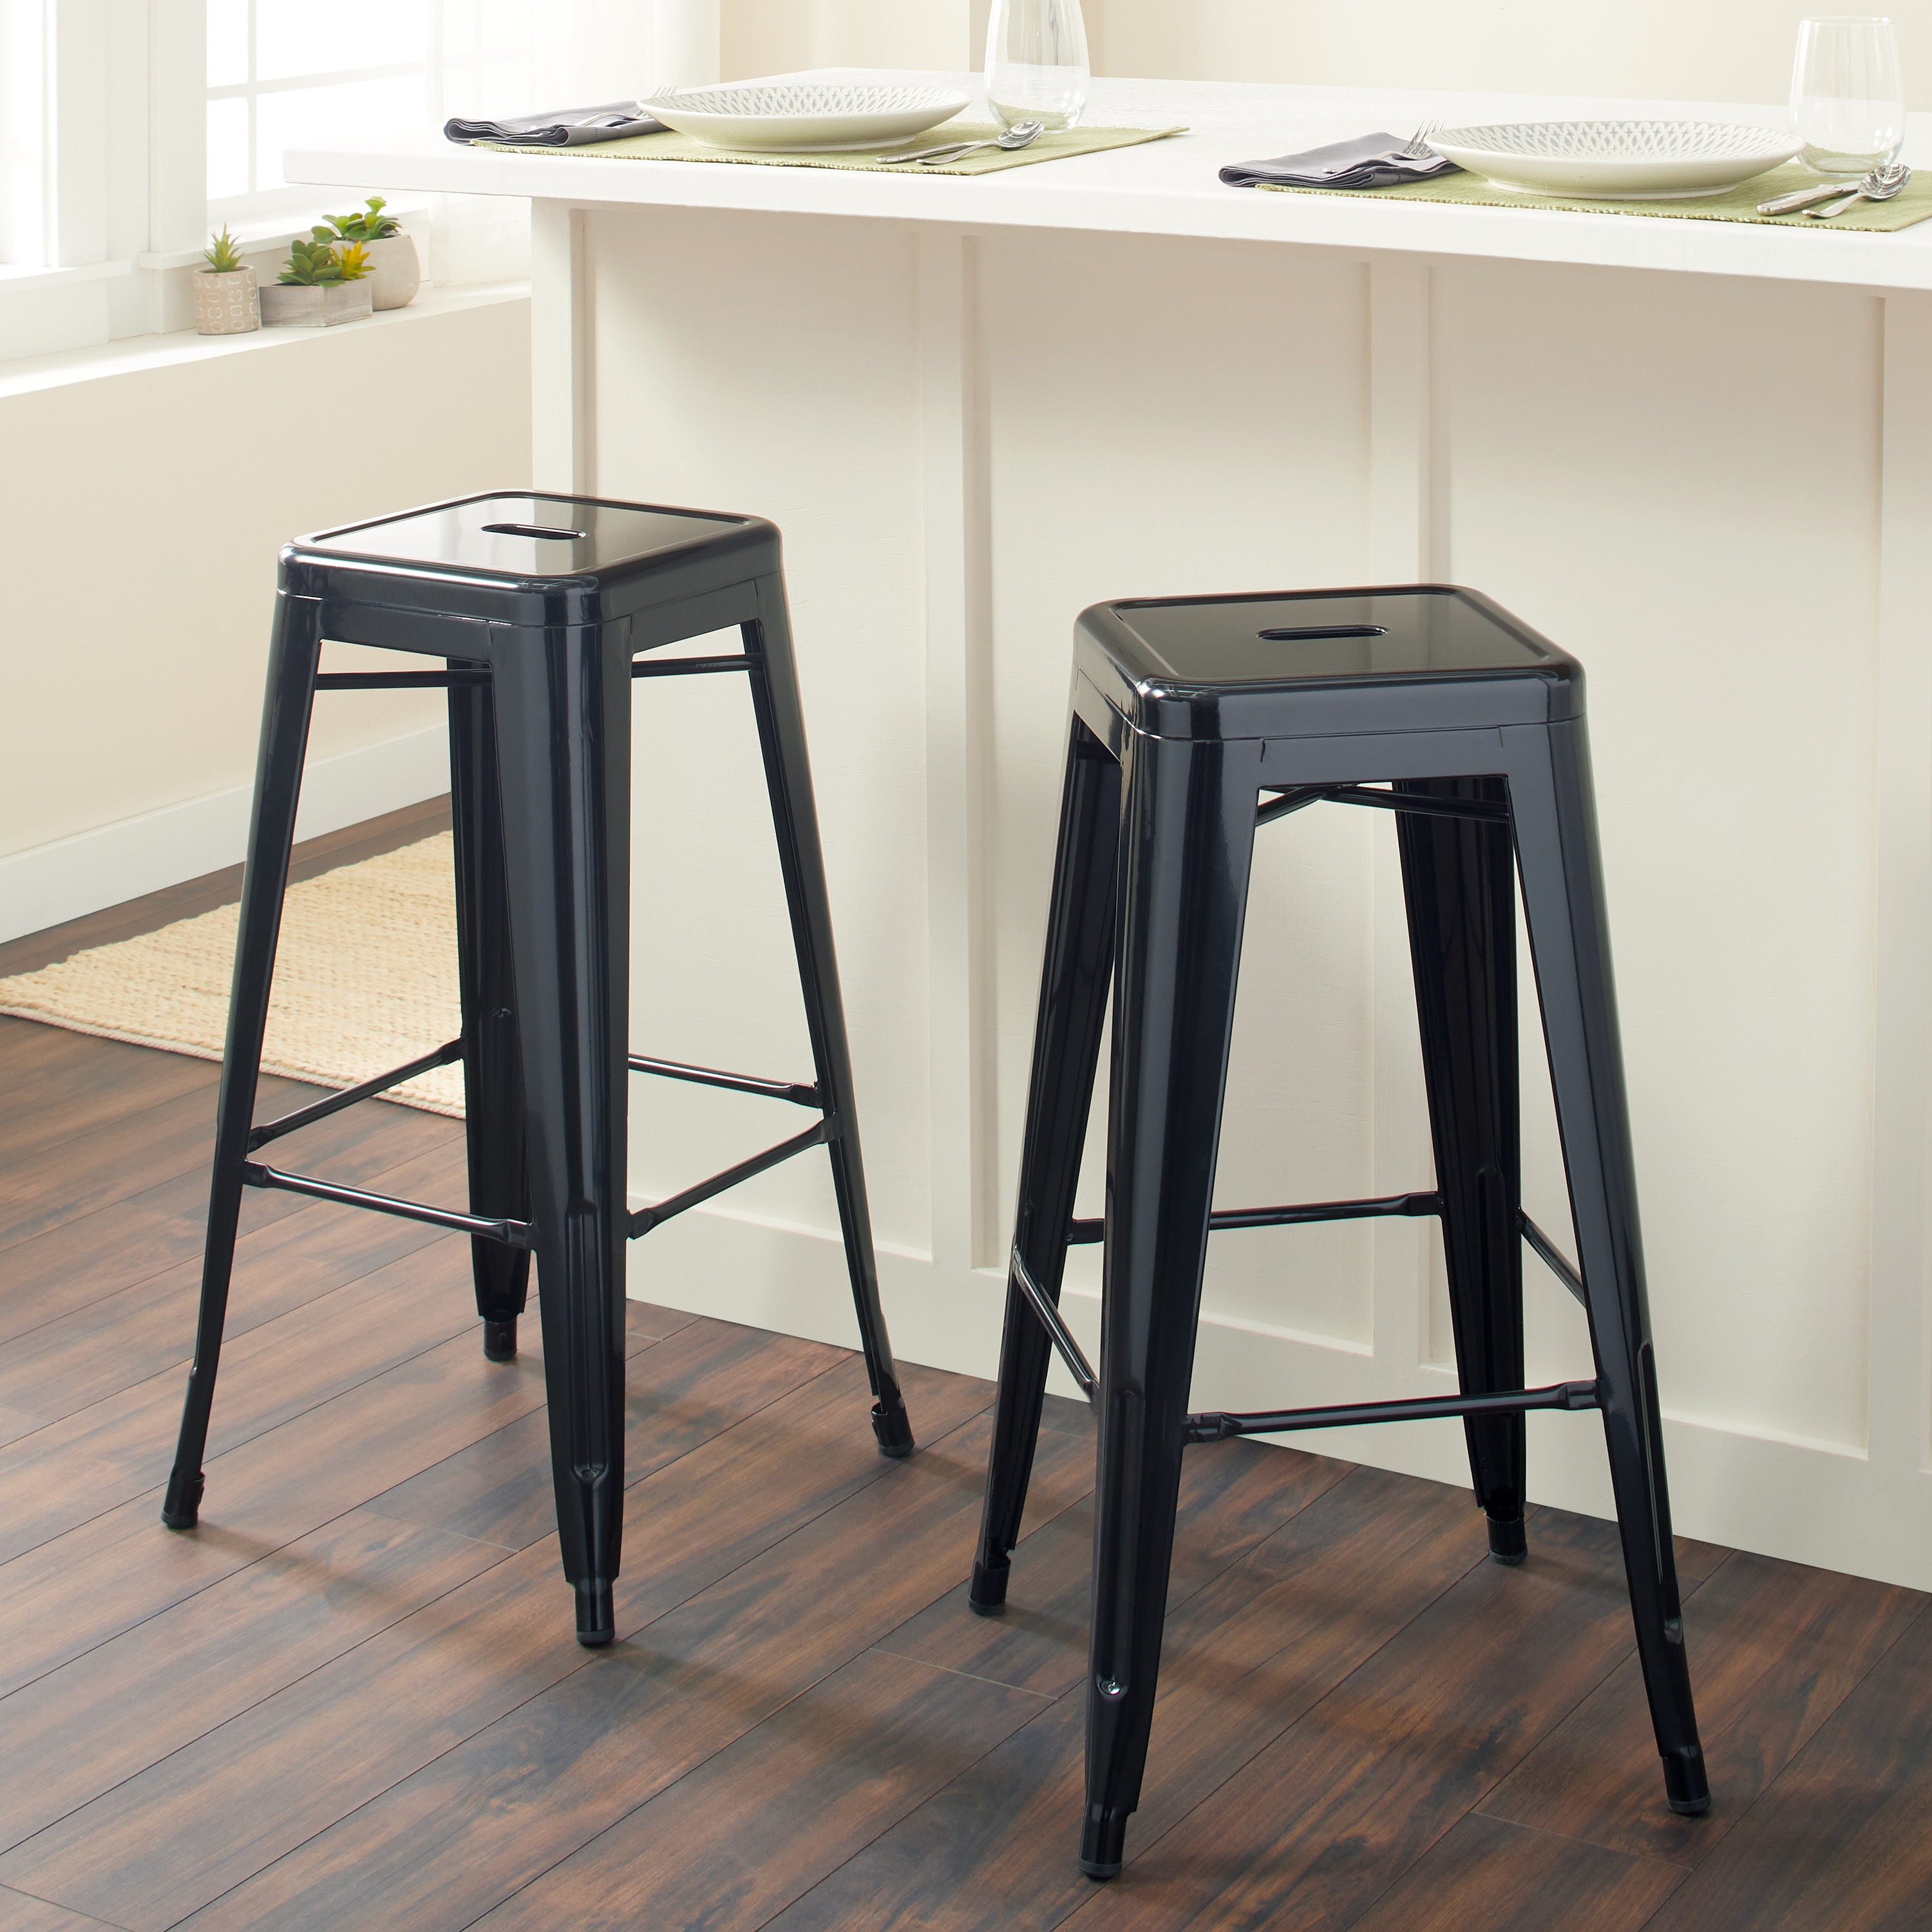 30 inch black metal bar stools set of 2 compare $ 125 99 today $ 99 99